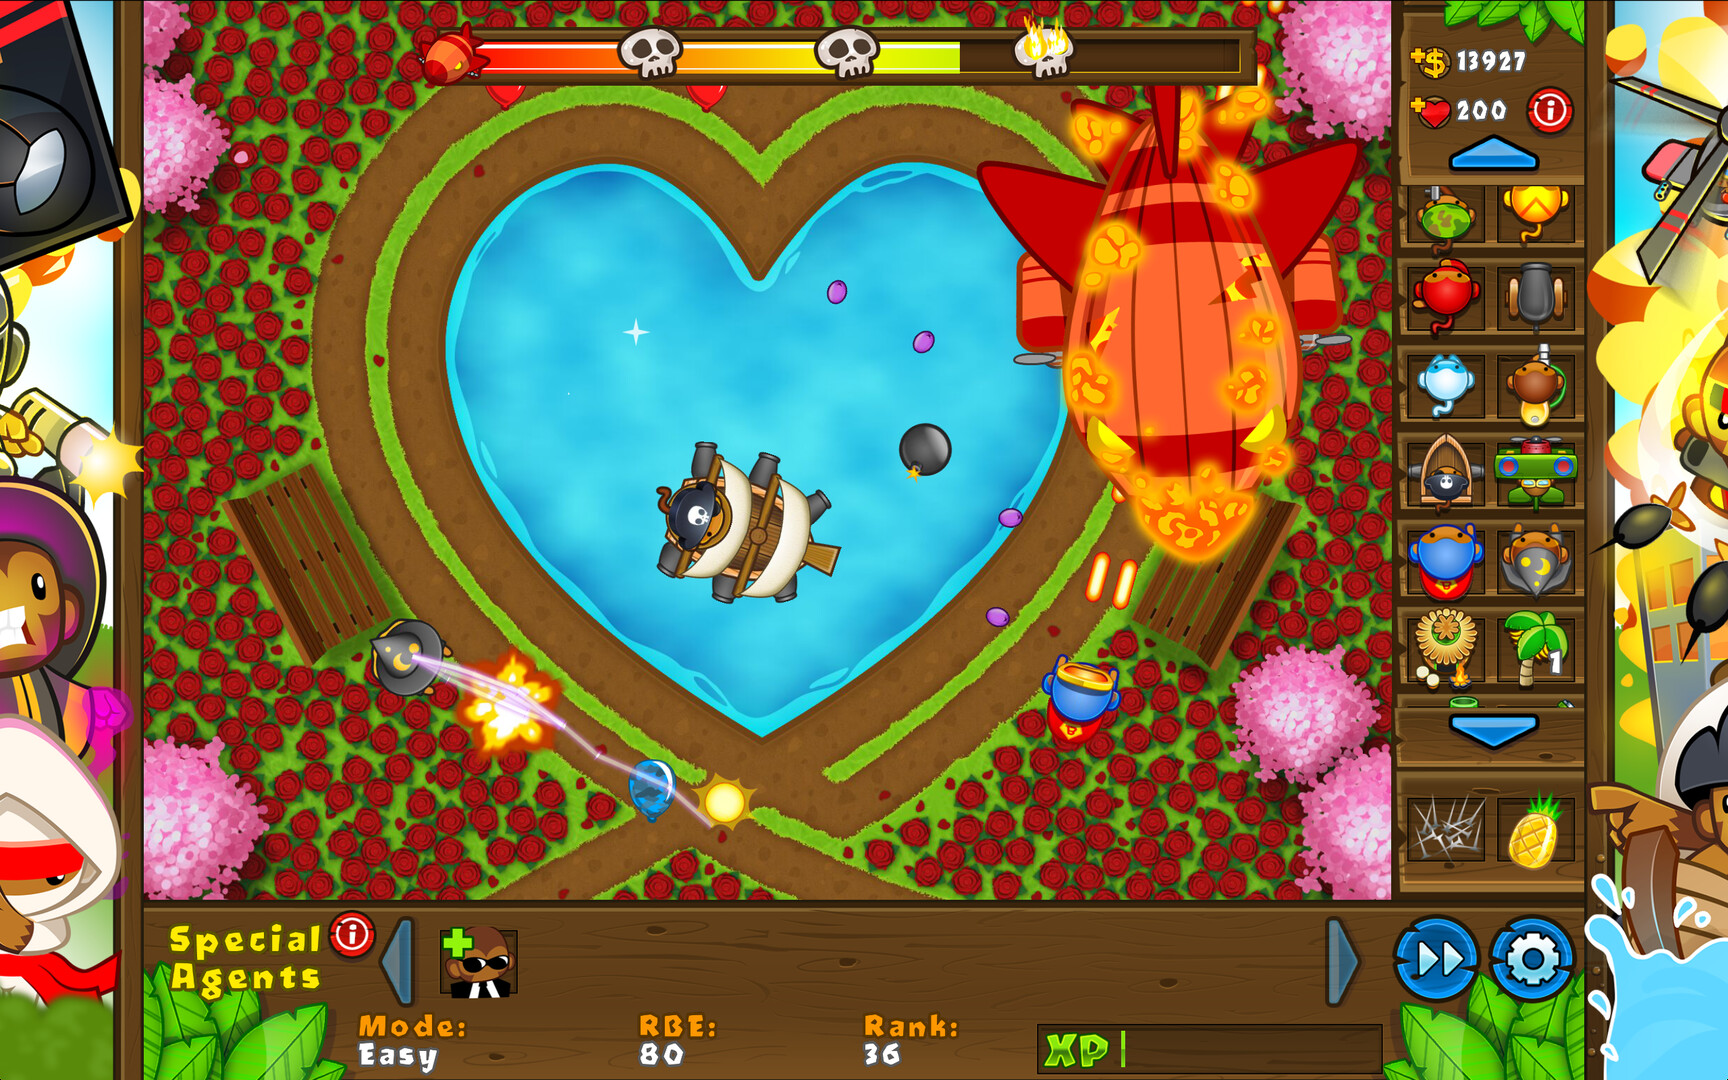 Ultimate Bloons Rush Tower Defense Bundle! Steam Account